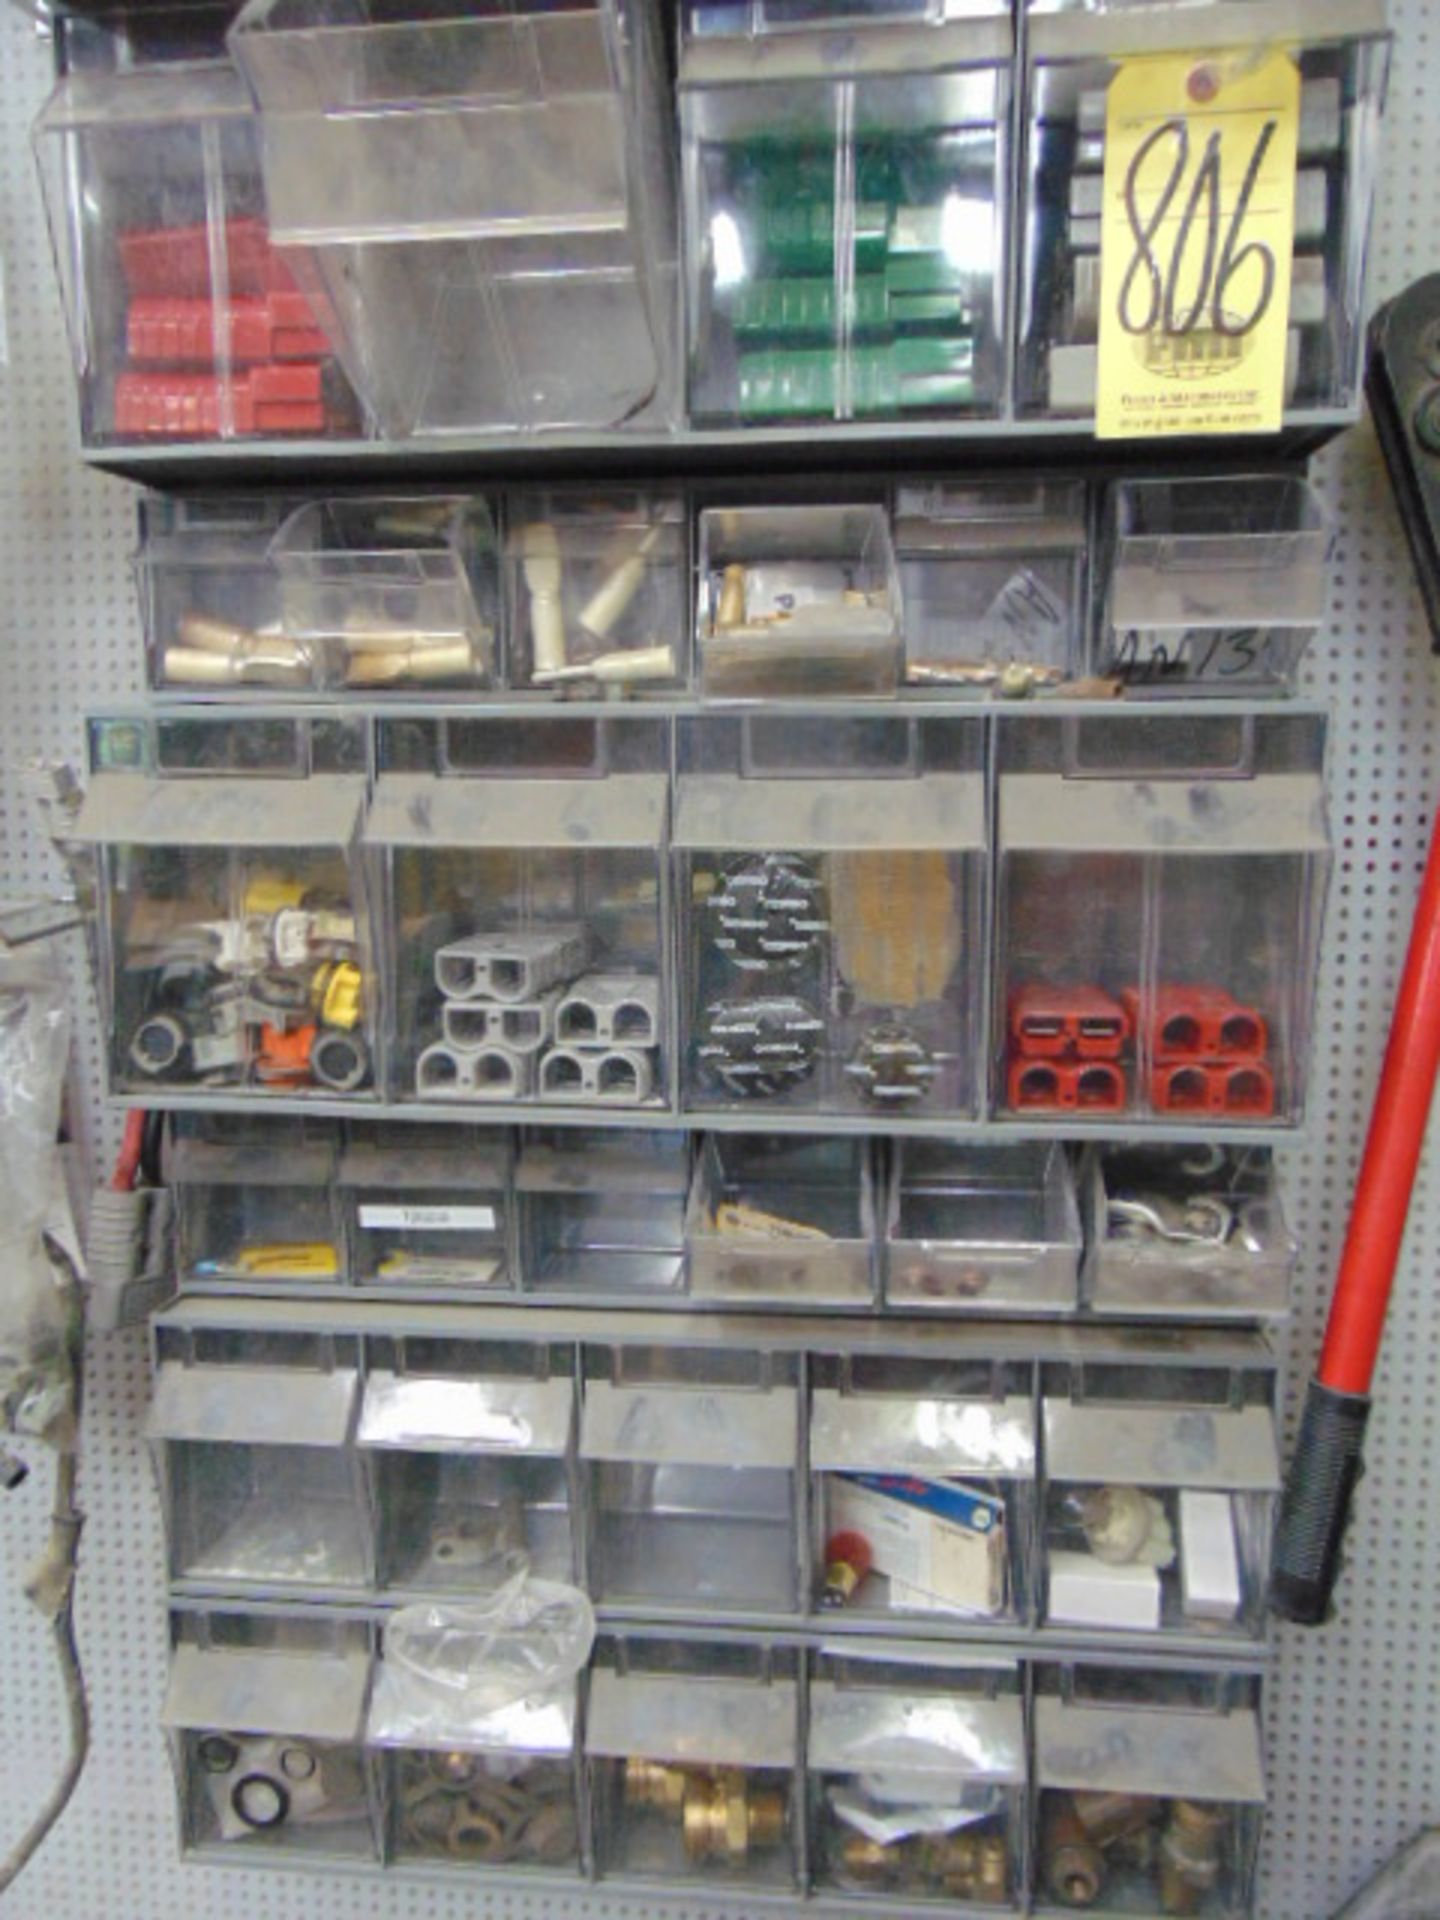 LOT CONSISTING OF: battery charger & forklift electrical repair parts, assorted